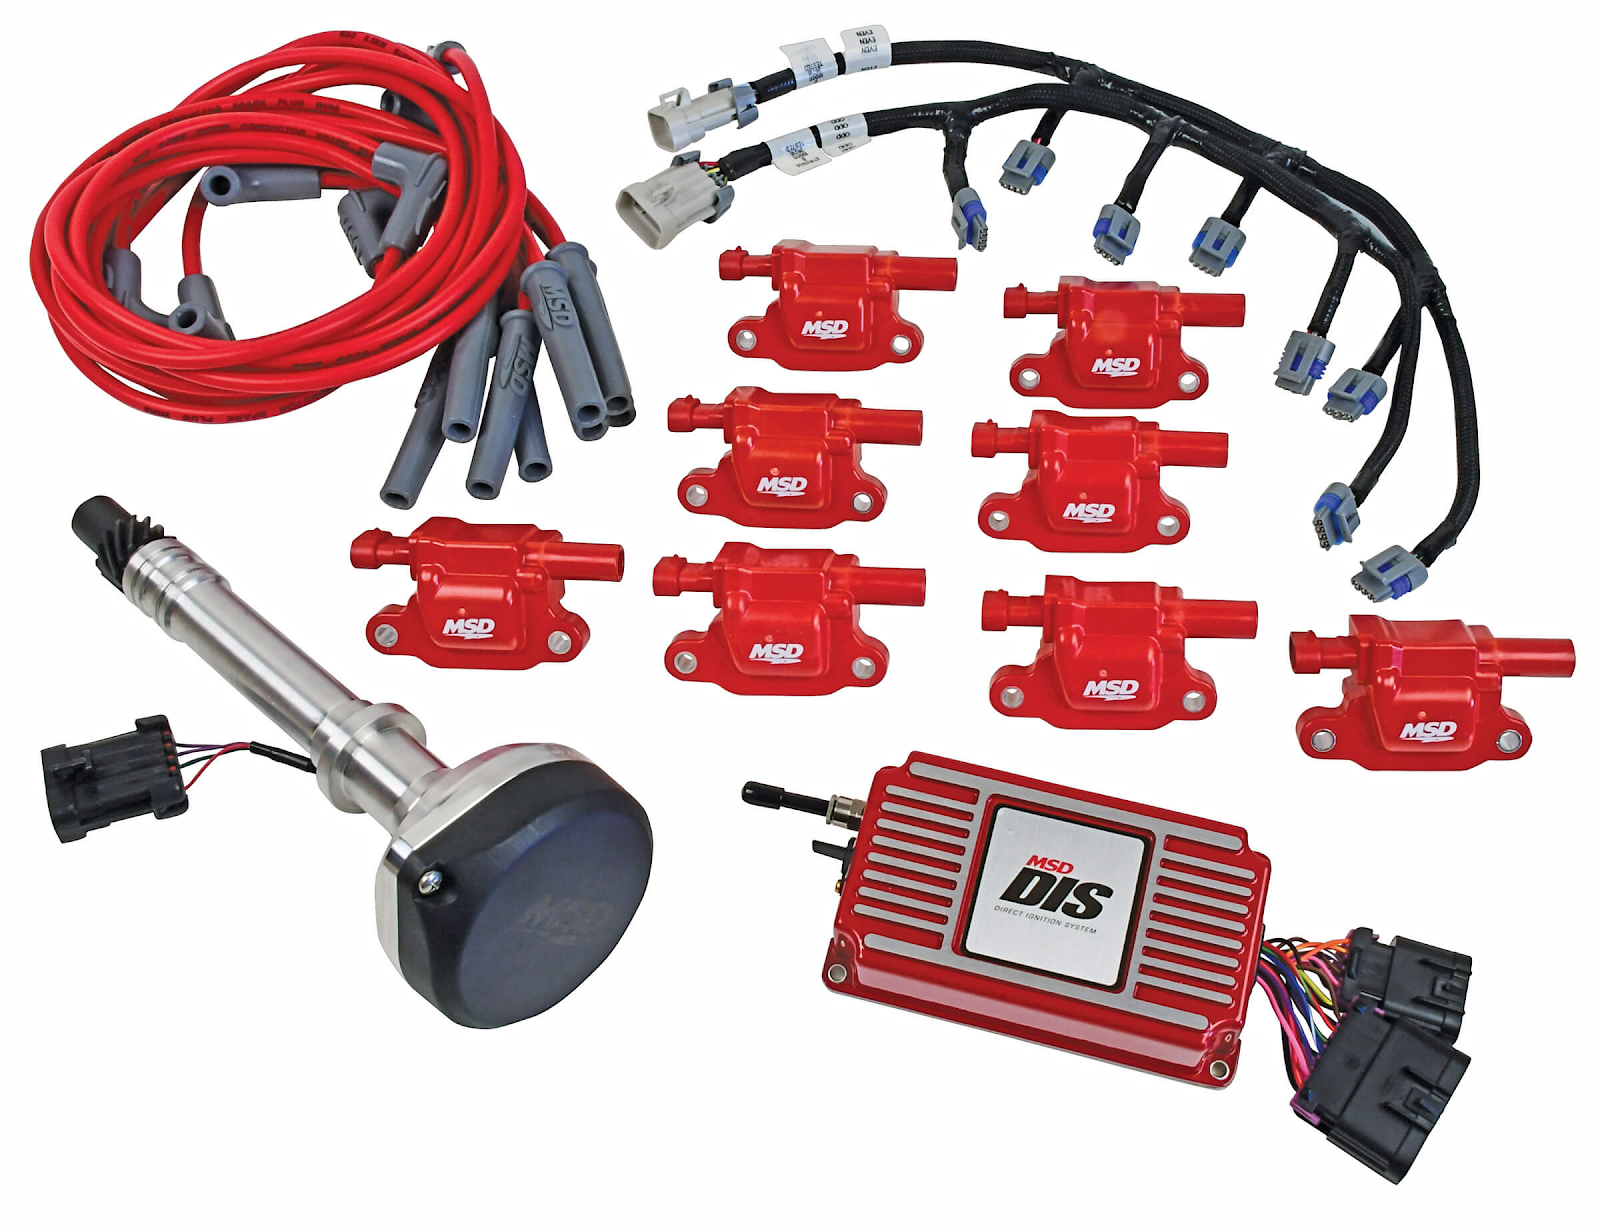 MSD Direct Ignition System